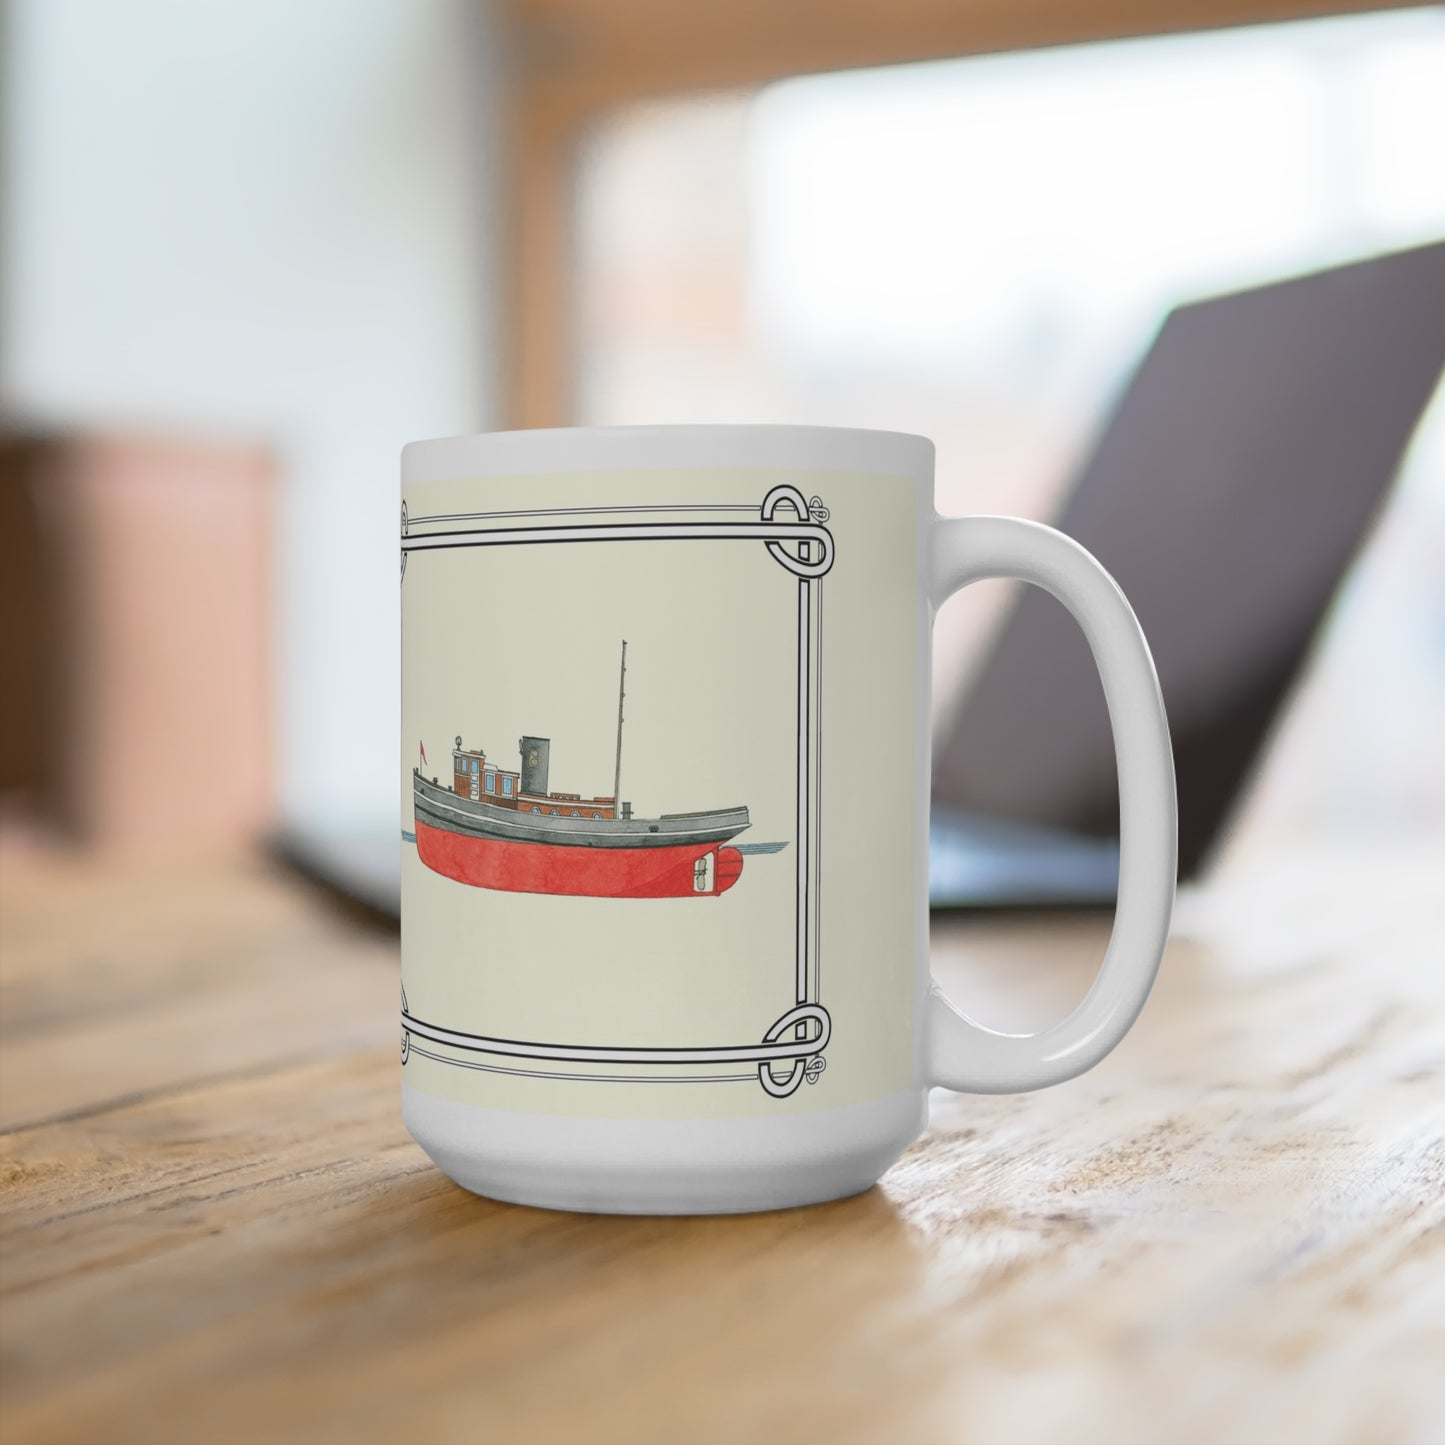 While you work on your laptop why not enjoy your favorite beverage in the Bright Star Diesel Tugboat Mug.